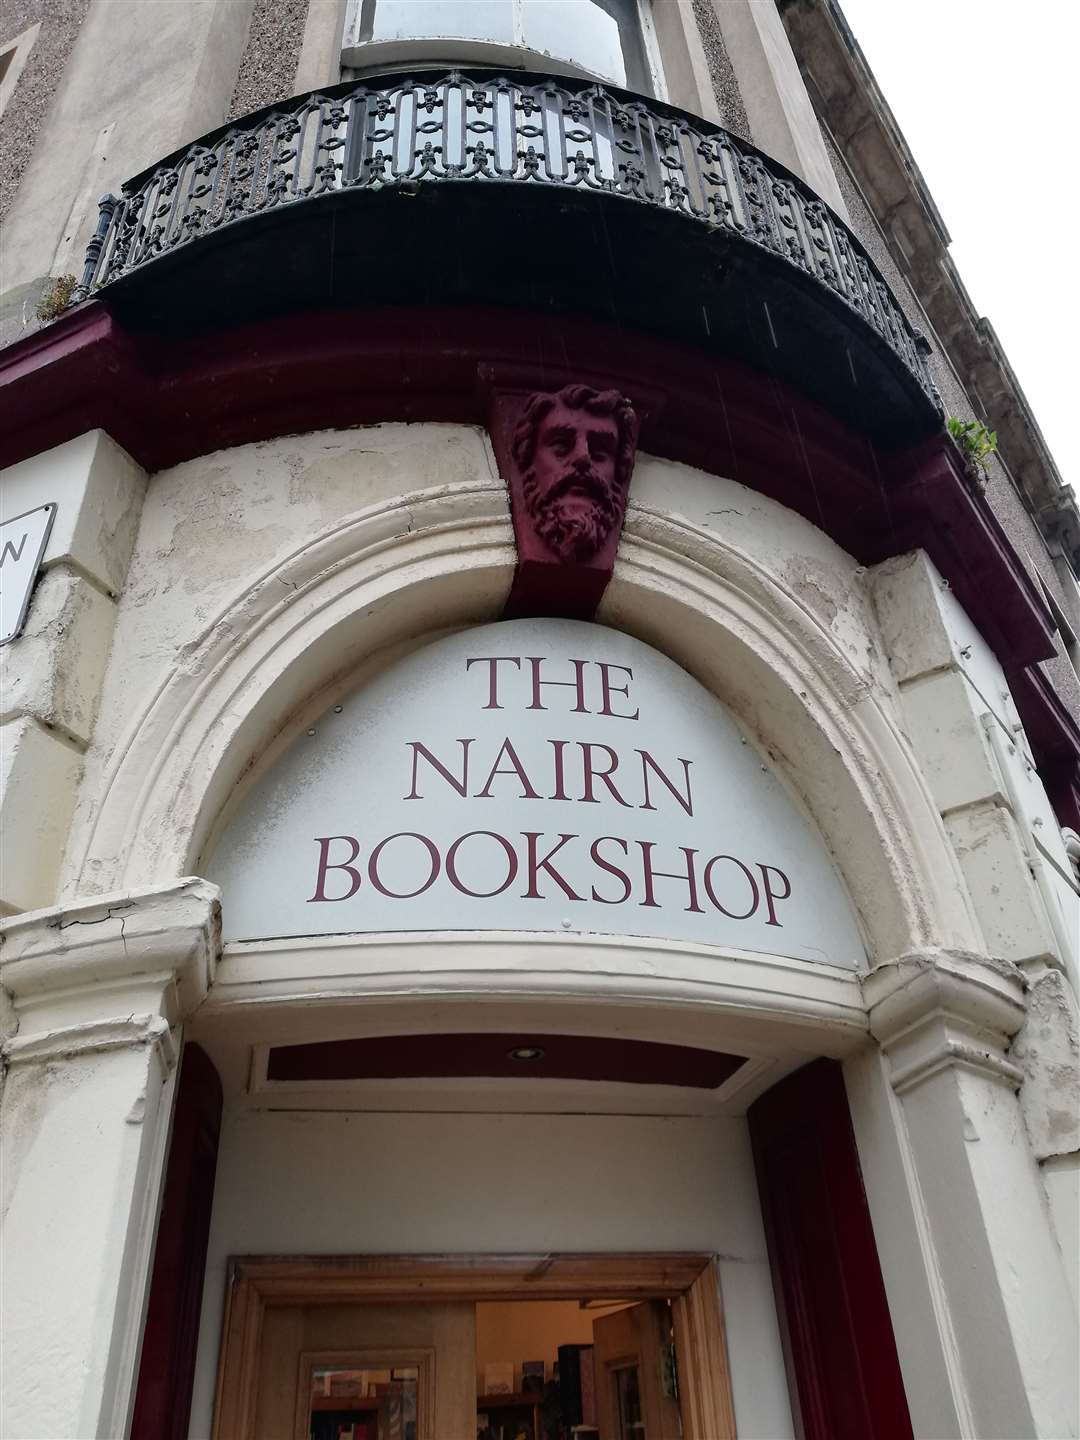 Nairn Bookshop, another stop on Bookshop Day for Barbara.